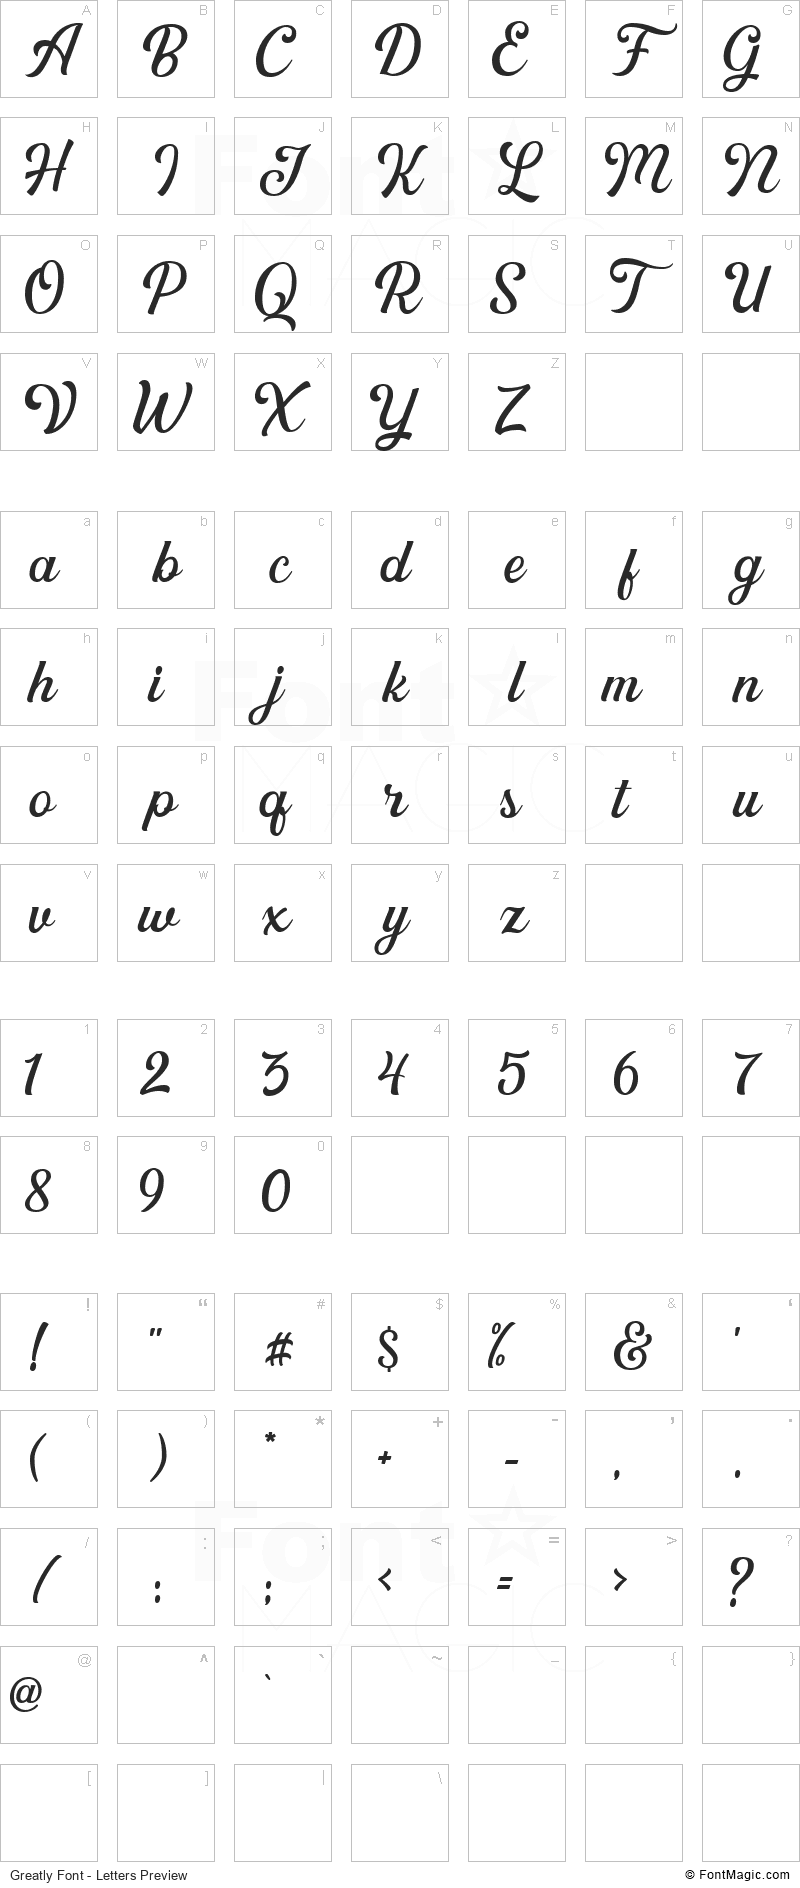 Greatly Font - All Latters Preview Chart